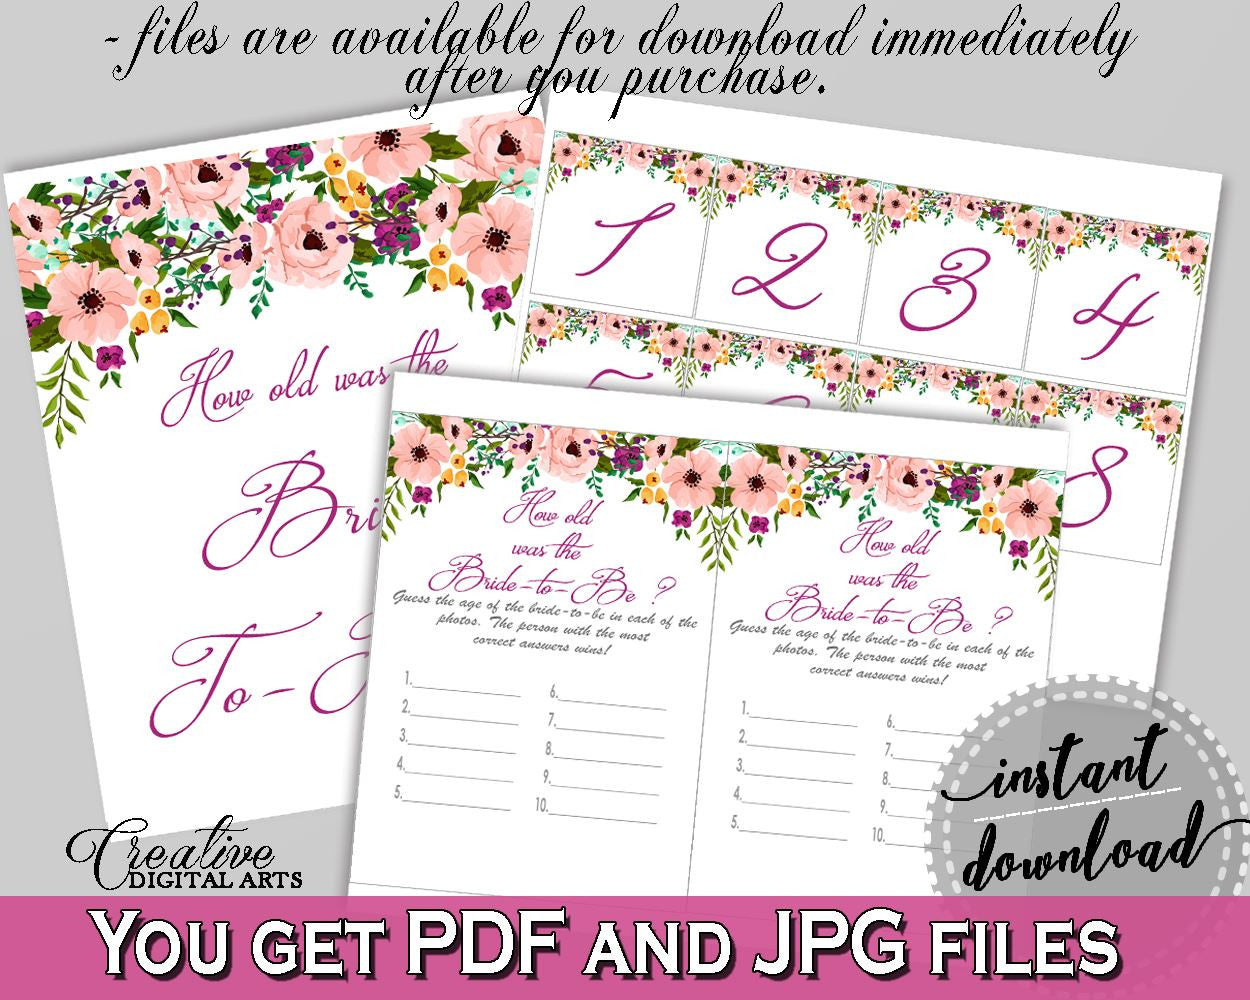 White And Pink Watercolor Flowers Bridal Shower Theme: How Old Was The Bride To Be - how old was fiancée, party planning, prints - 9GOY4 - Digital Product